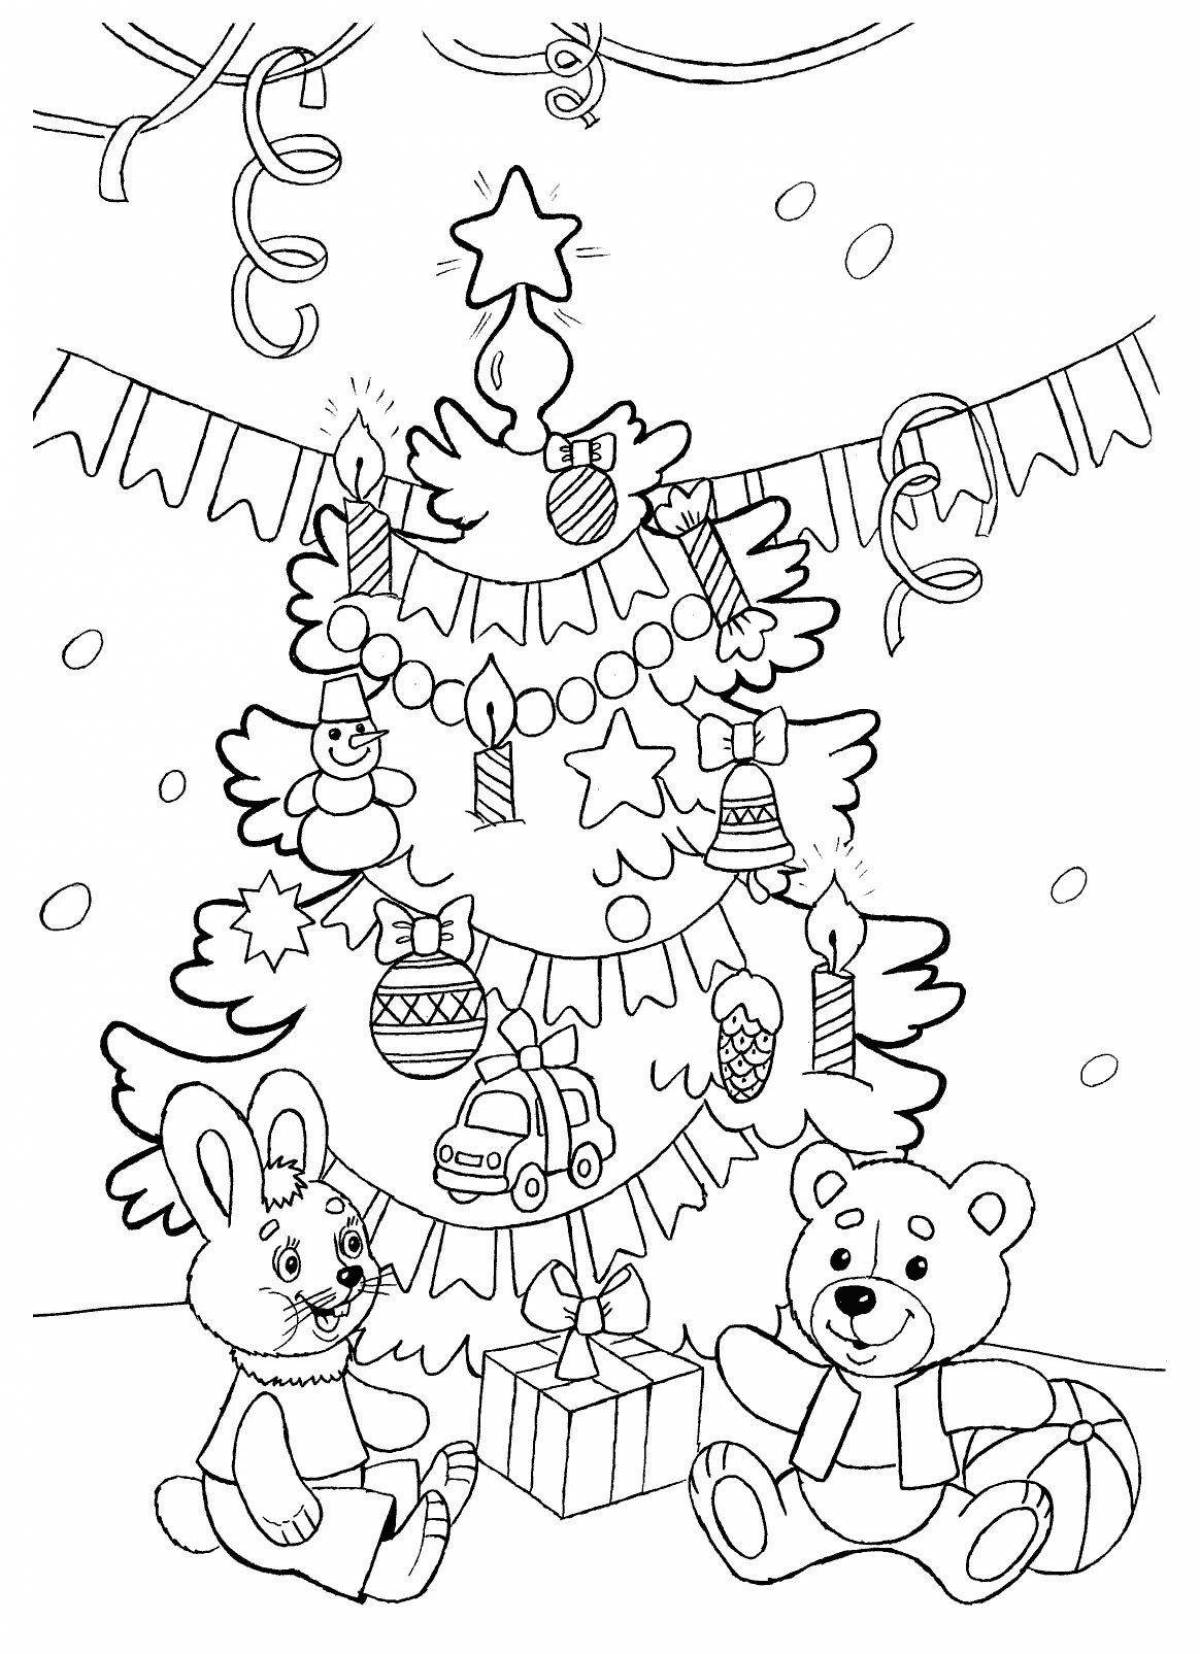 Wonderful Christmas tree coloring book for kids 6-7 years old